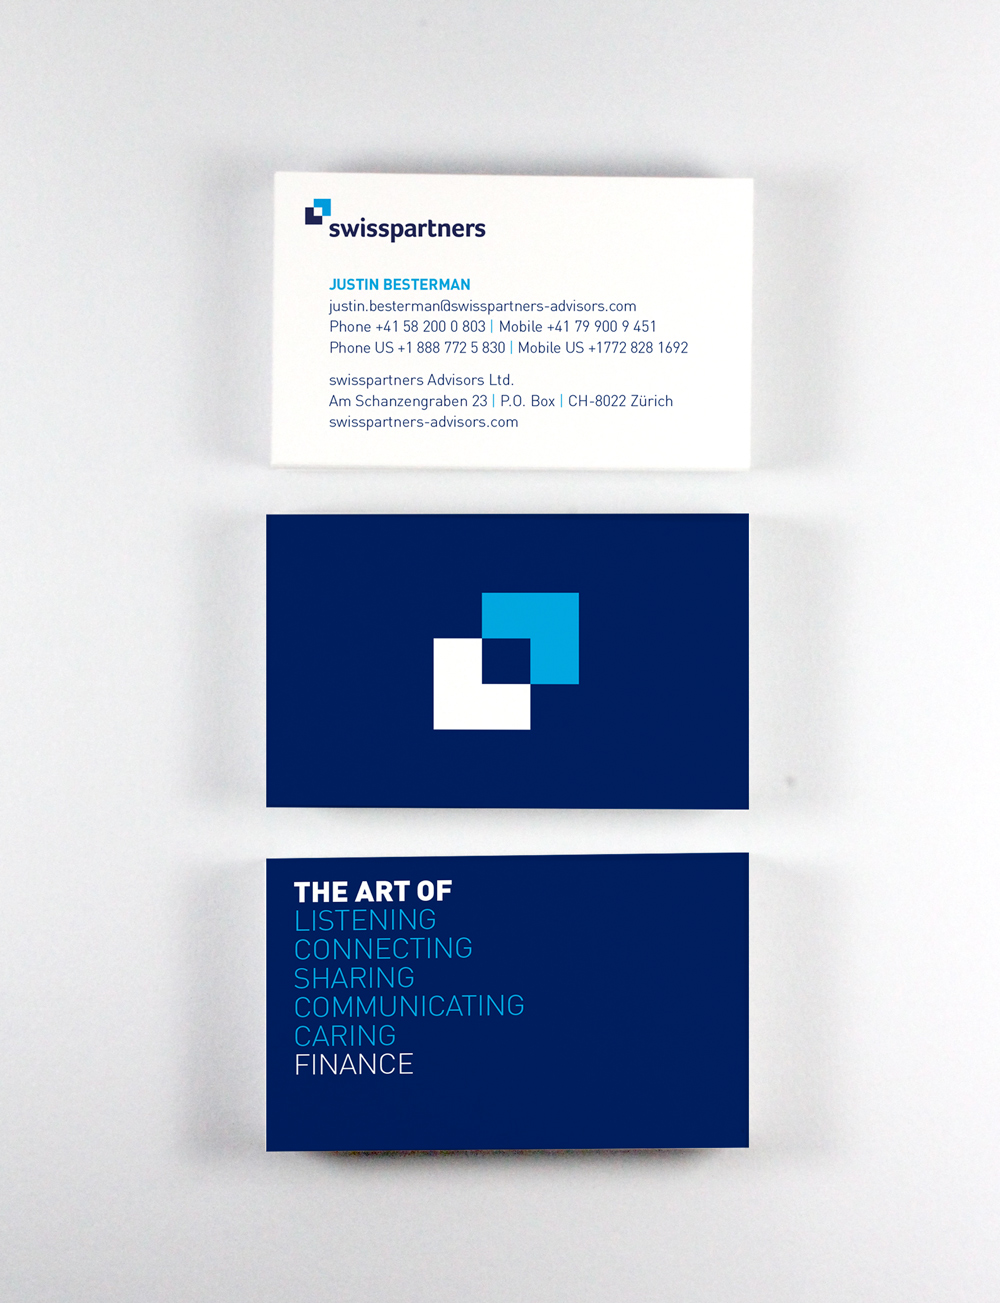 Swisspartners_business_cards